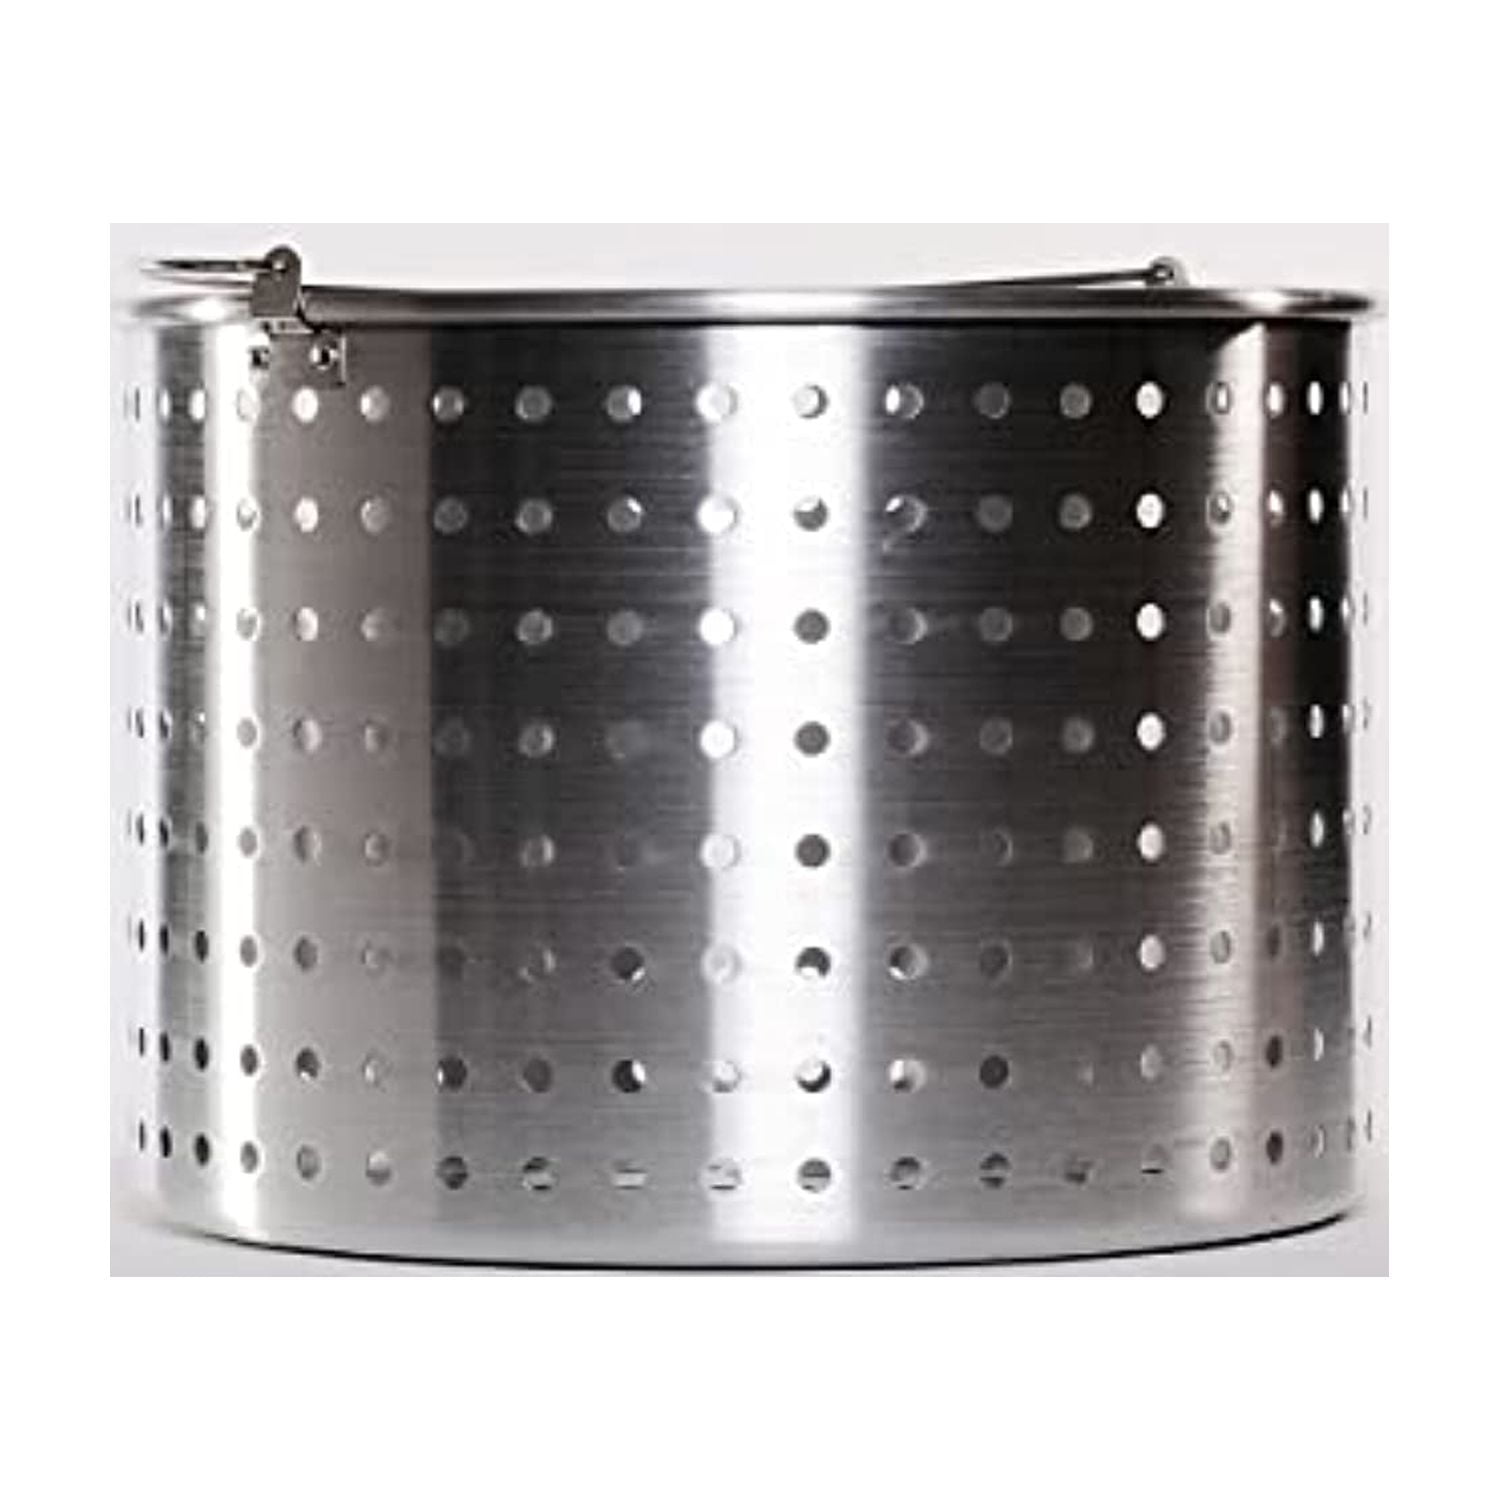 Aluminum Cooking Pot, Punched Hole Basket and Lid, 60-Qts.